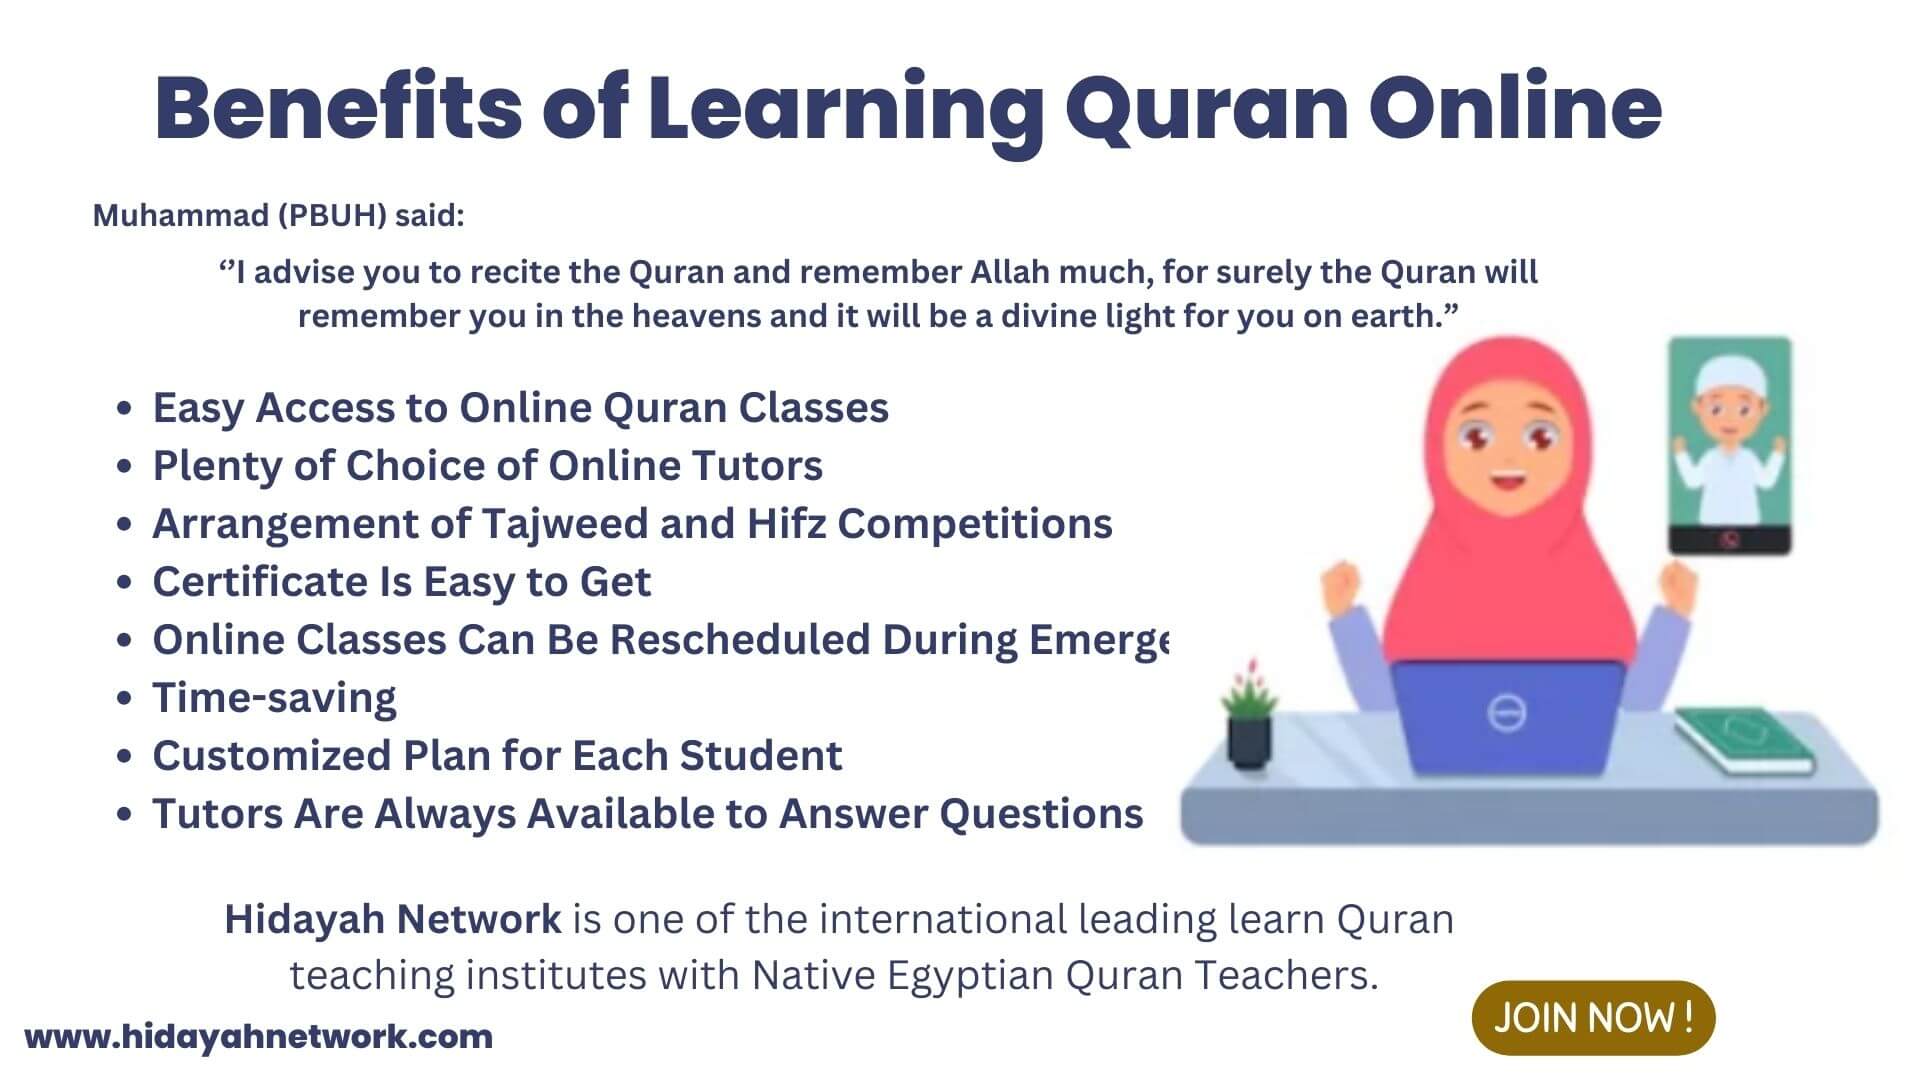 Benefits of Learning Quran Online